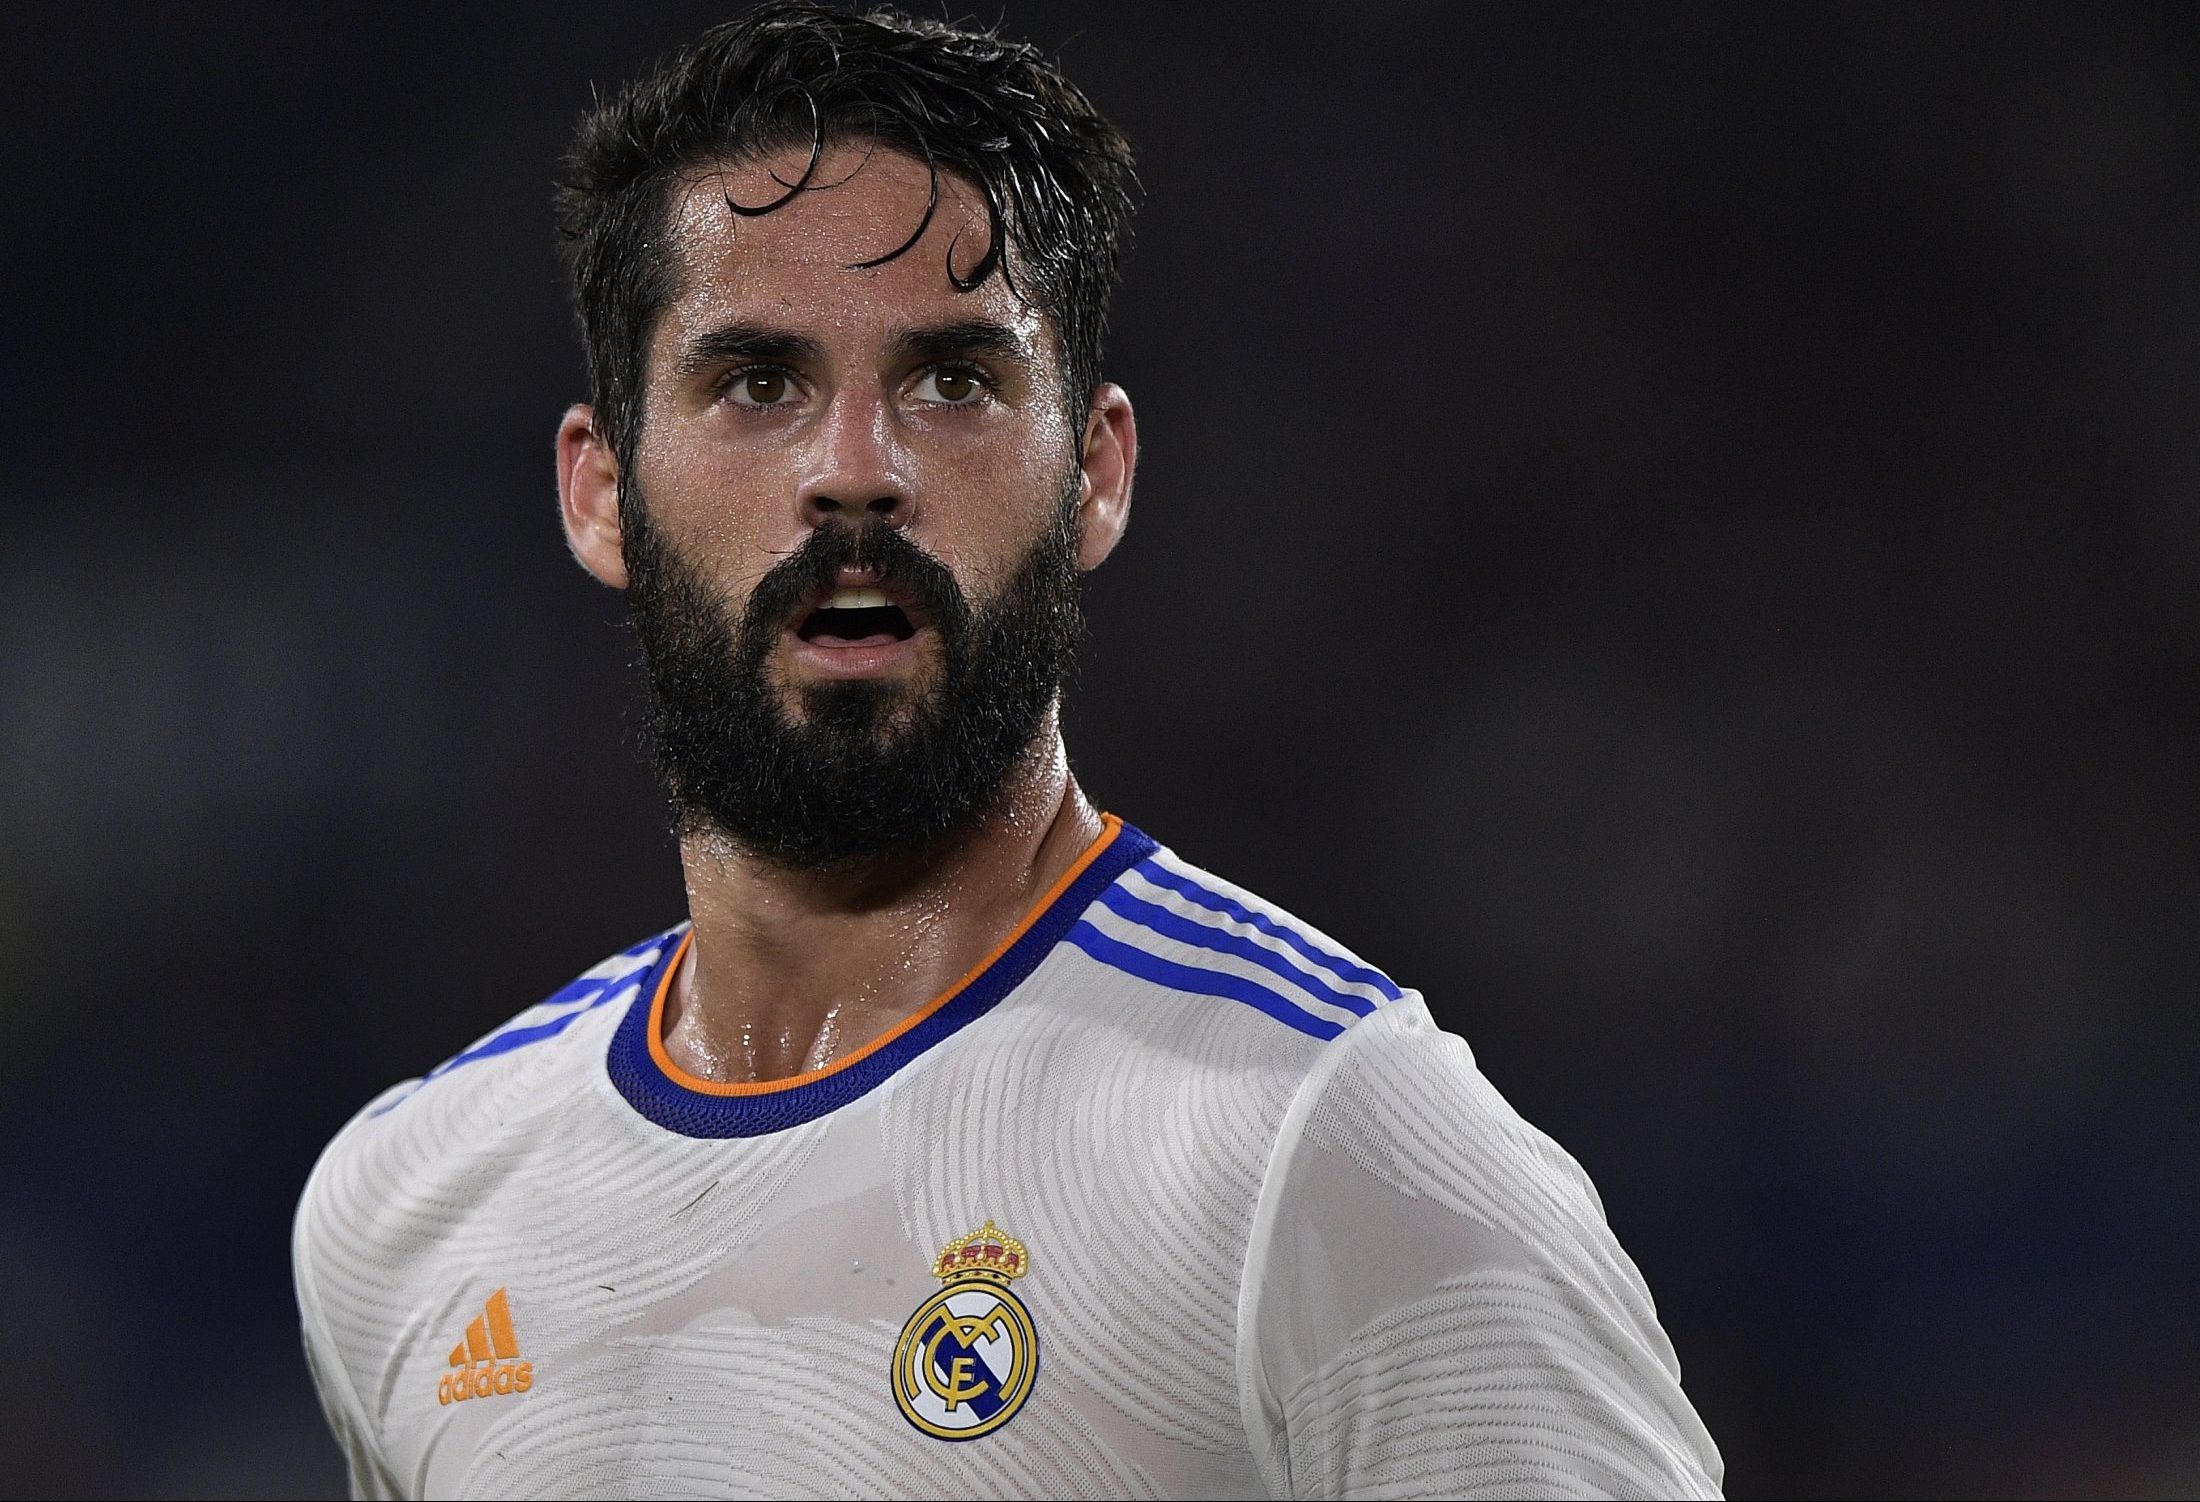 Real Madrid attacking midfielder Isco looks on during LaLiga clash against Levante